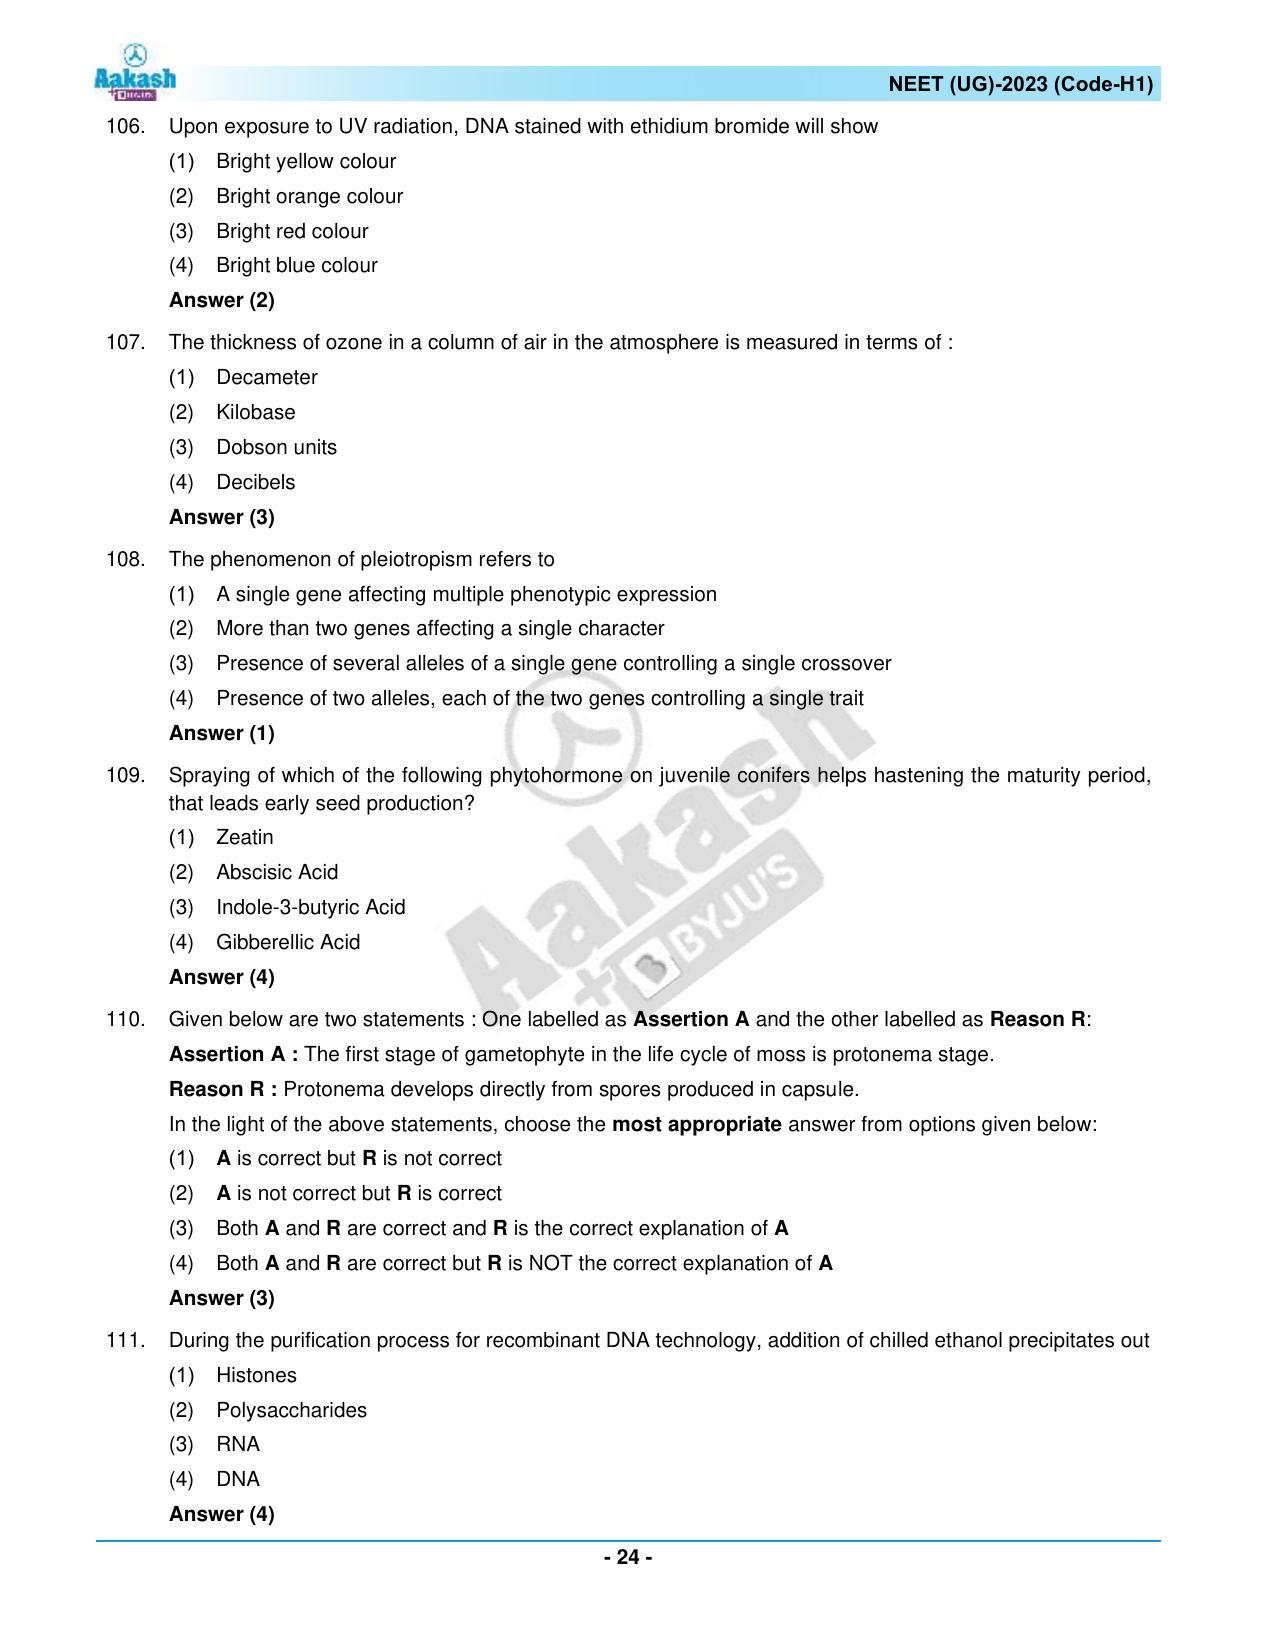 NEET 2023 Question Paper H1 - Page 24